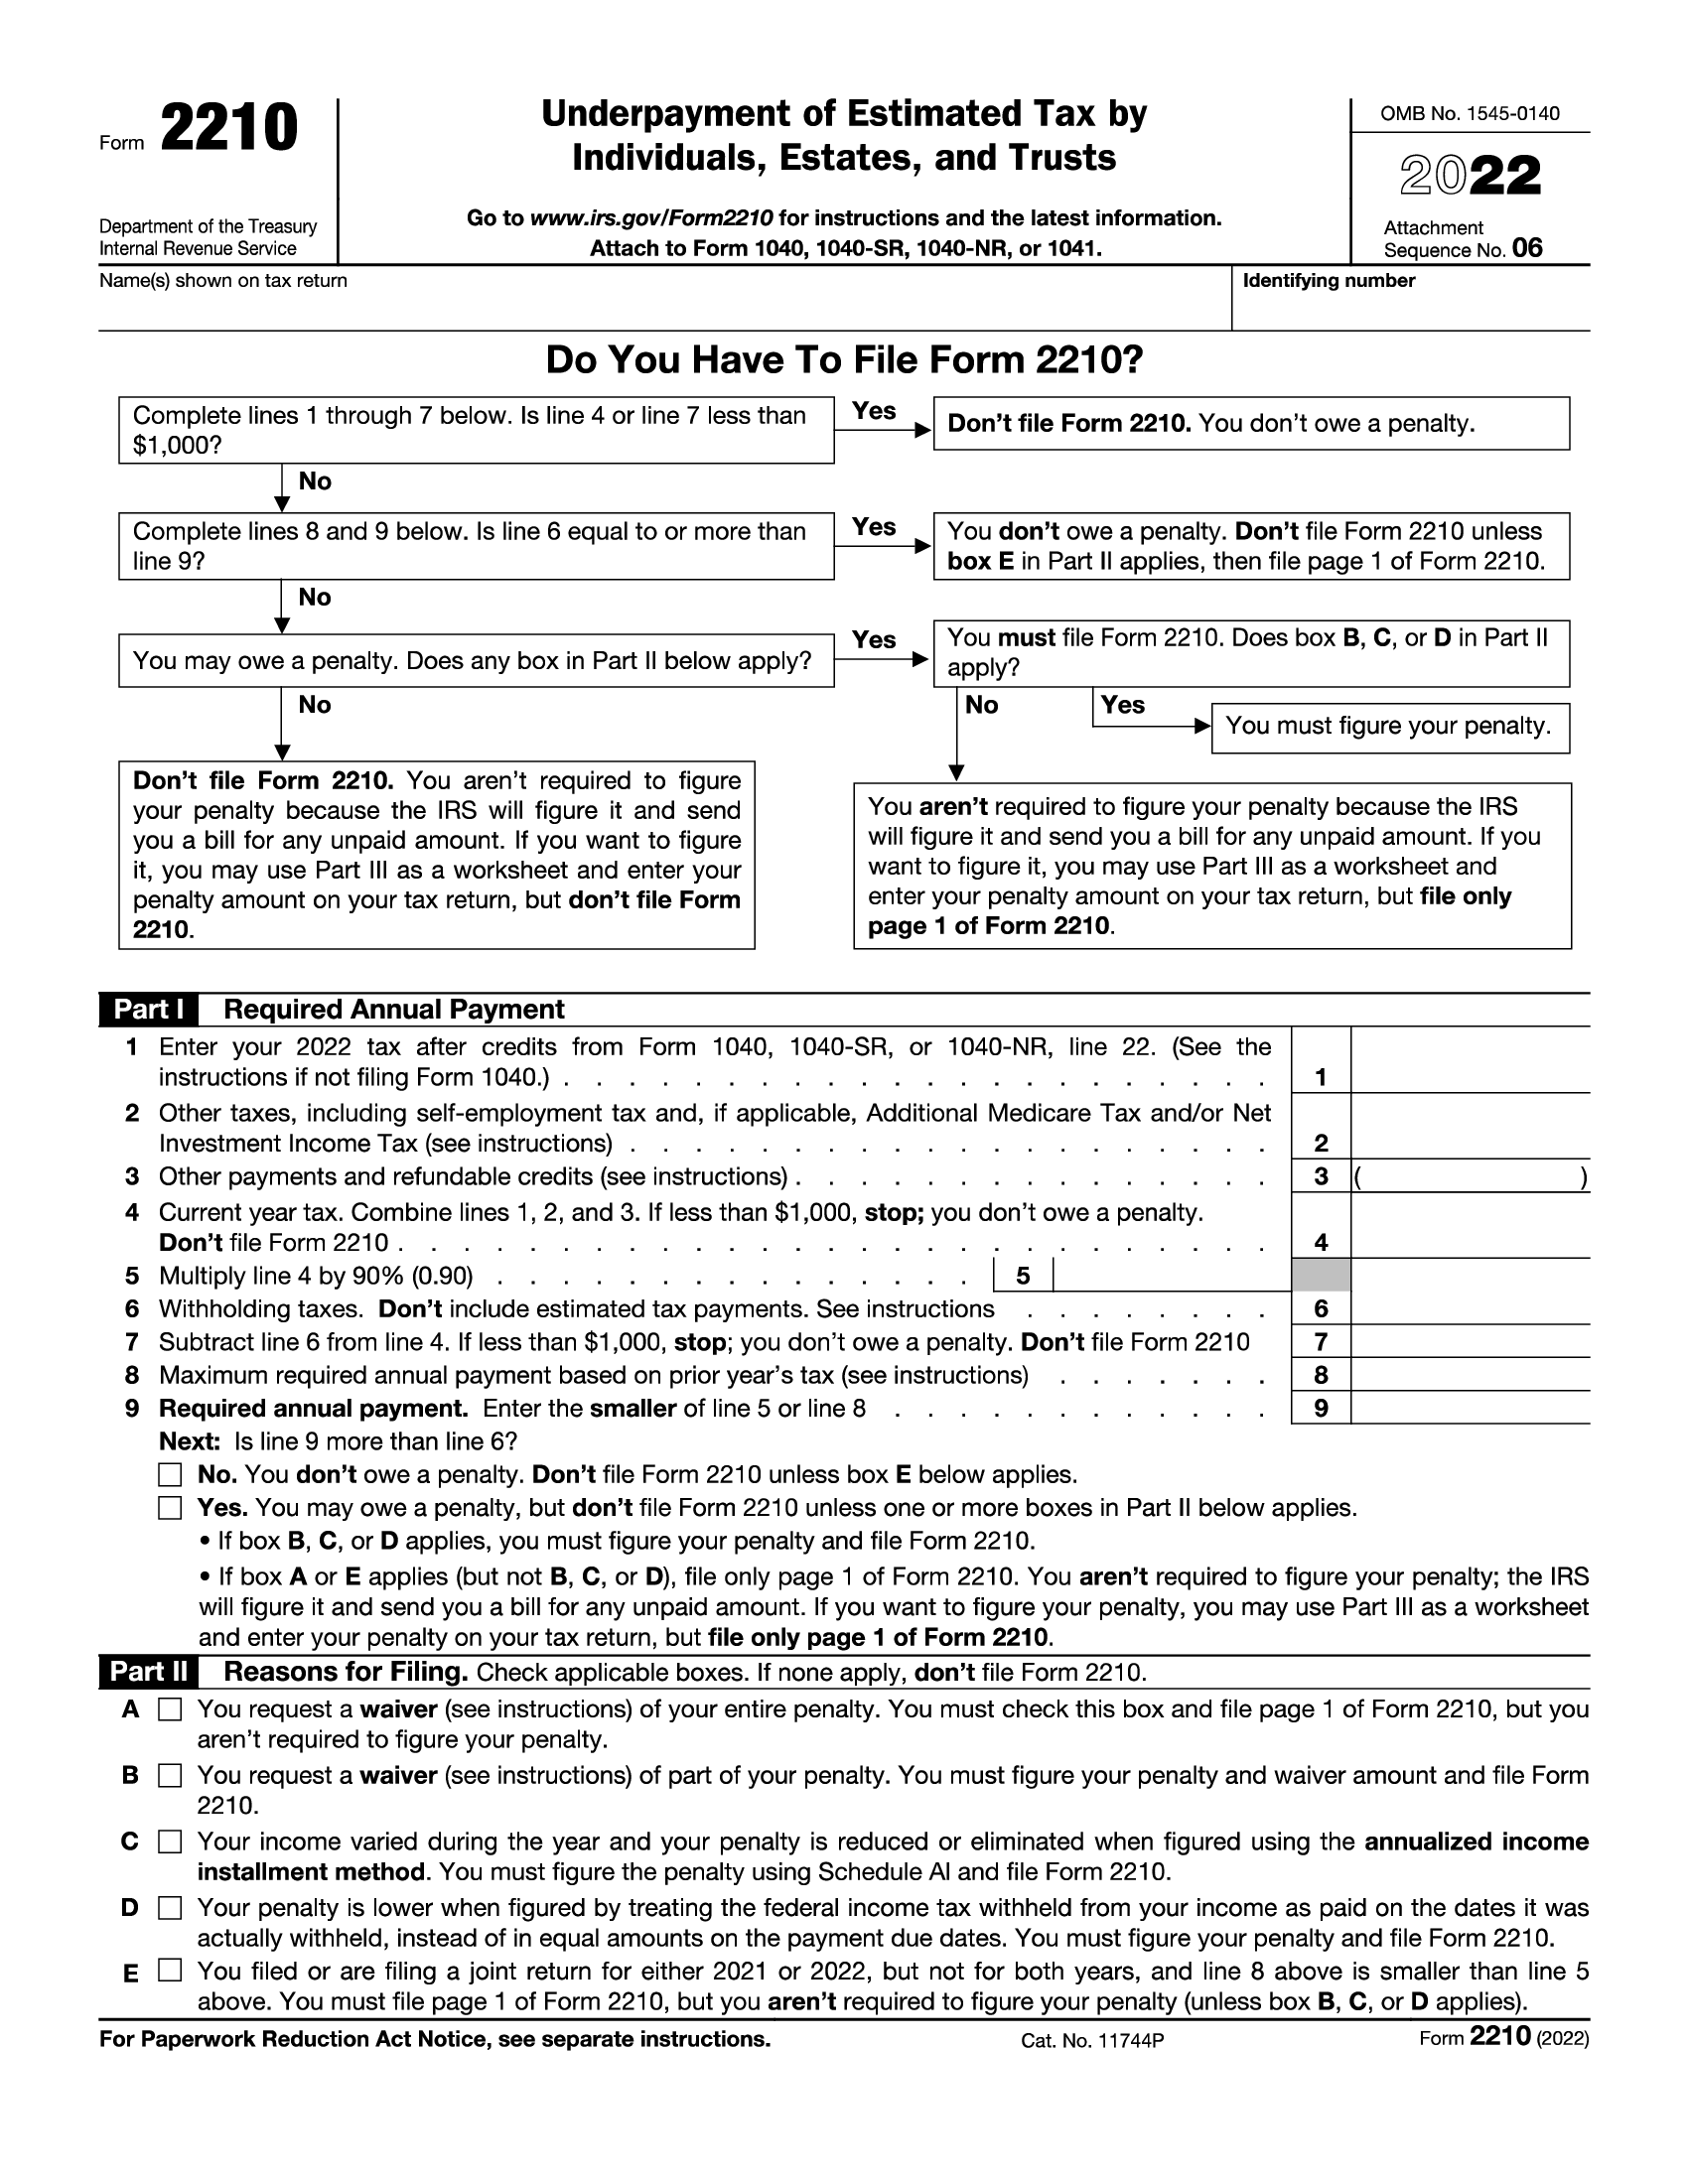 irs-form-2210-underpayment-of-estimated-tax-by-individuals-estates